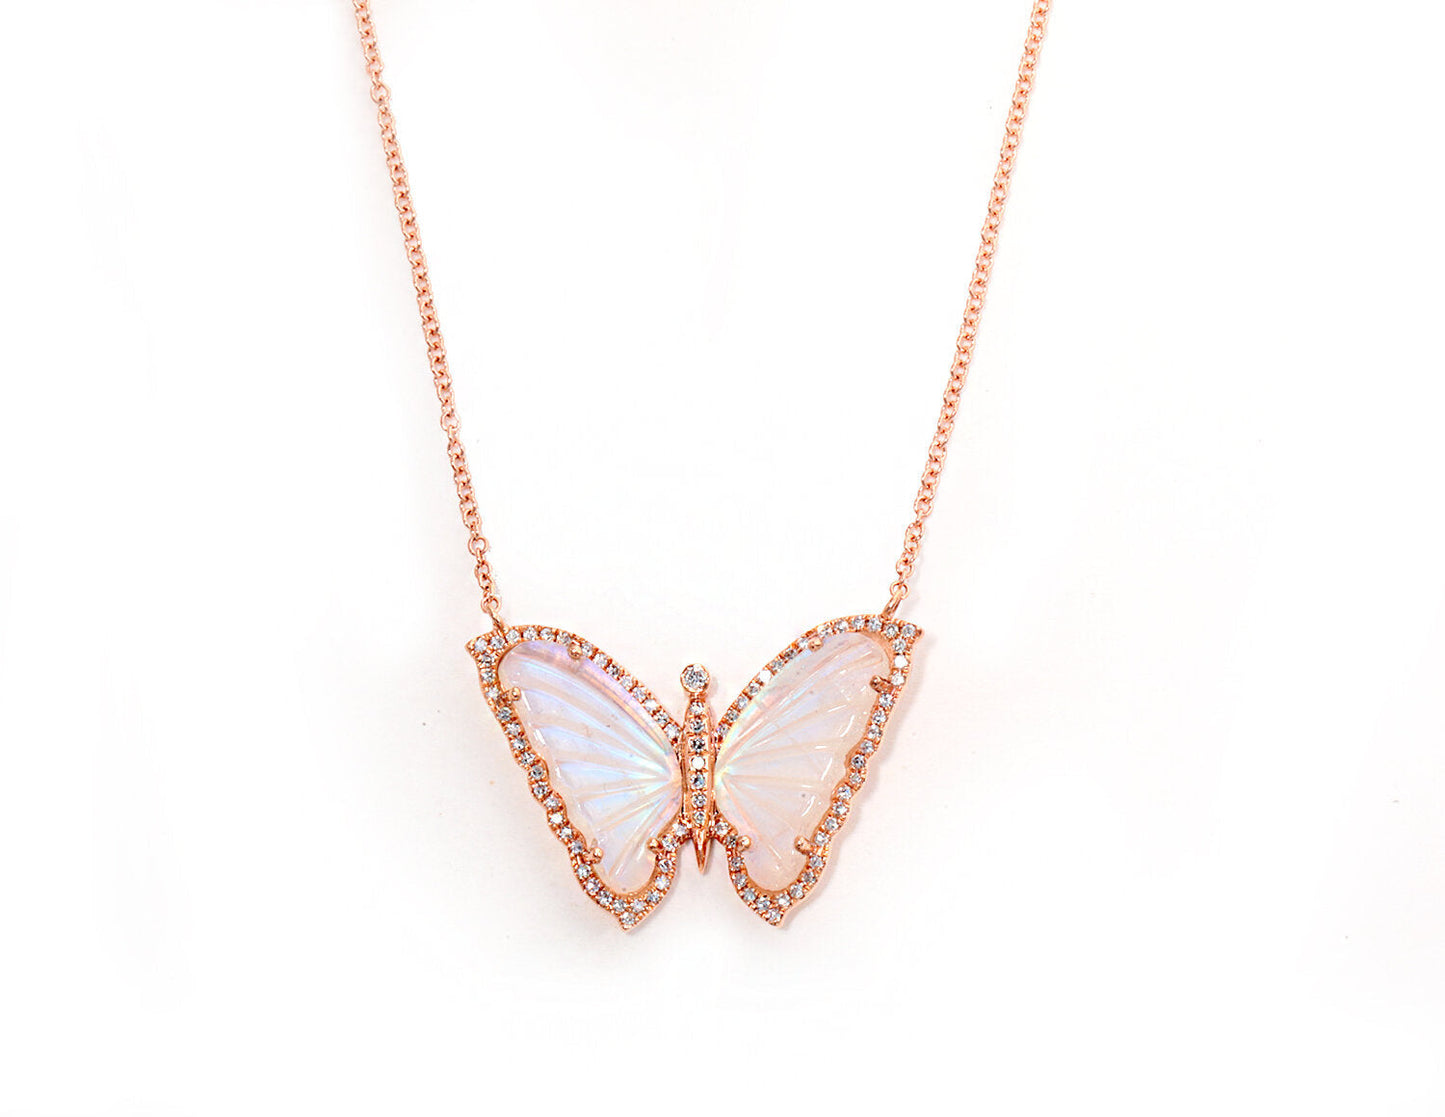 Diamond Pave and Moonstone Butterfly Necklace